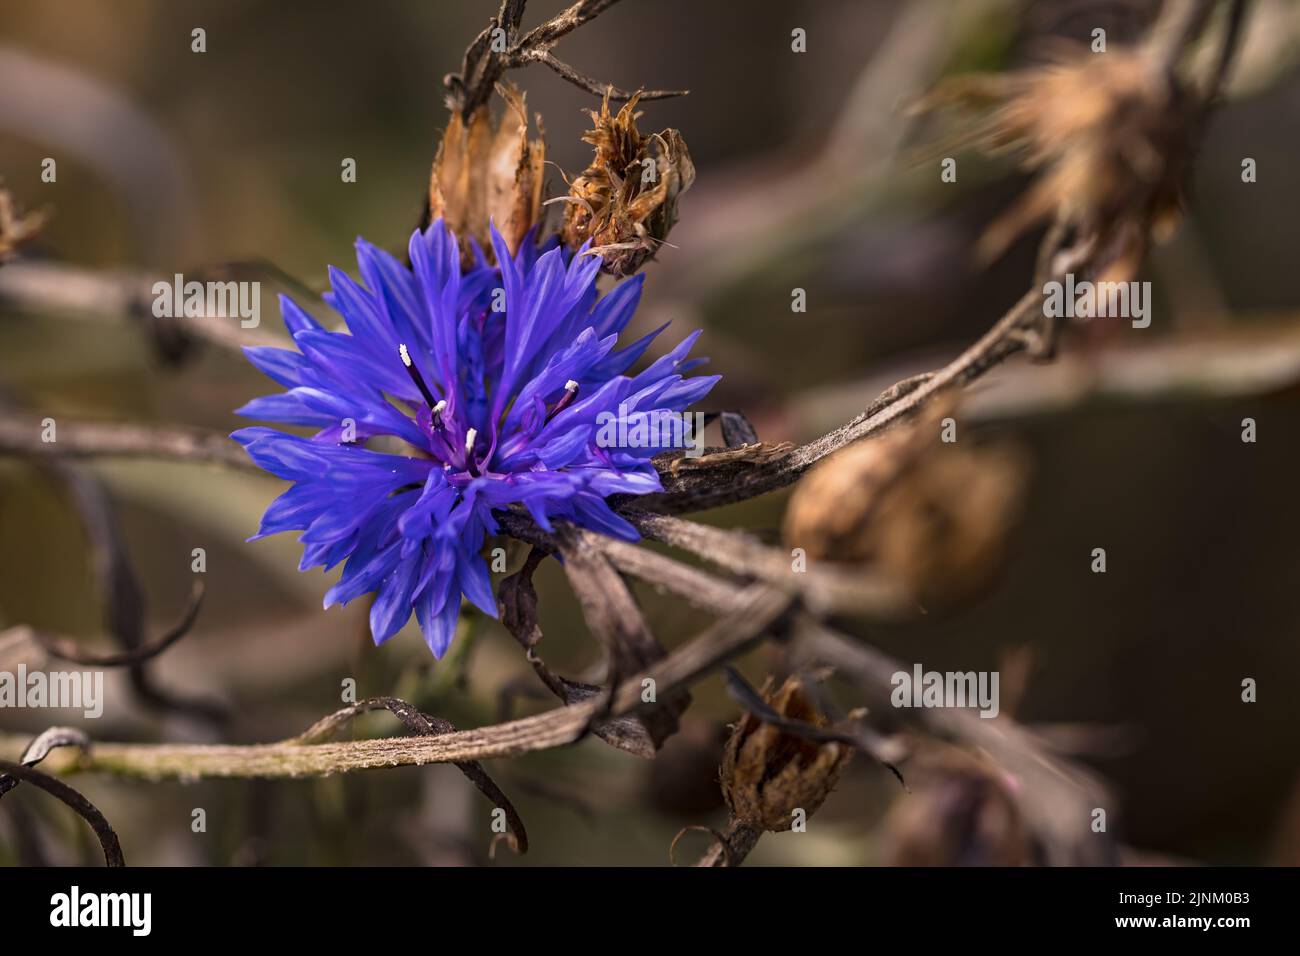 The striking blue flower of a cornflower isolated in front of brown withered leaves, garden in Germany Stock Photo